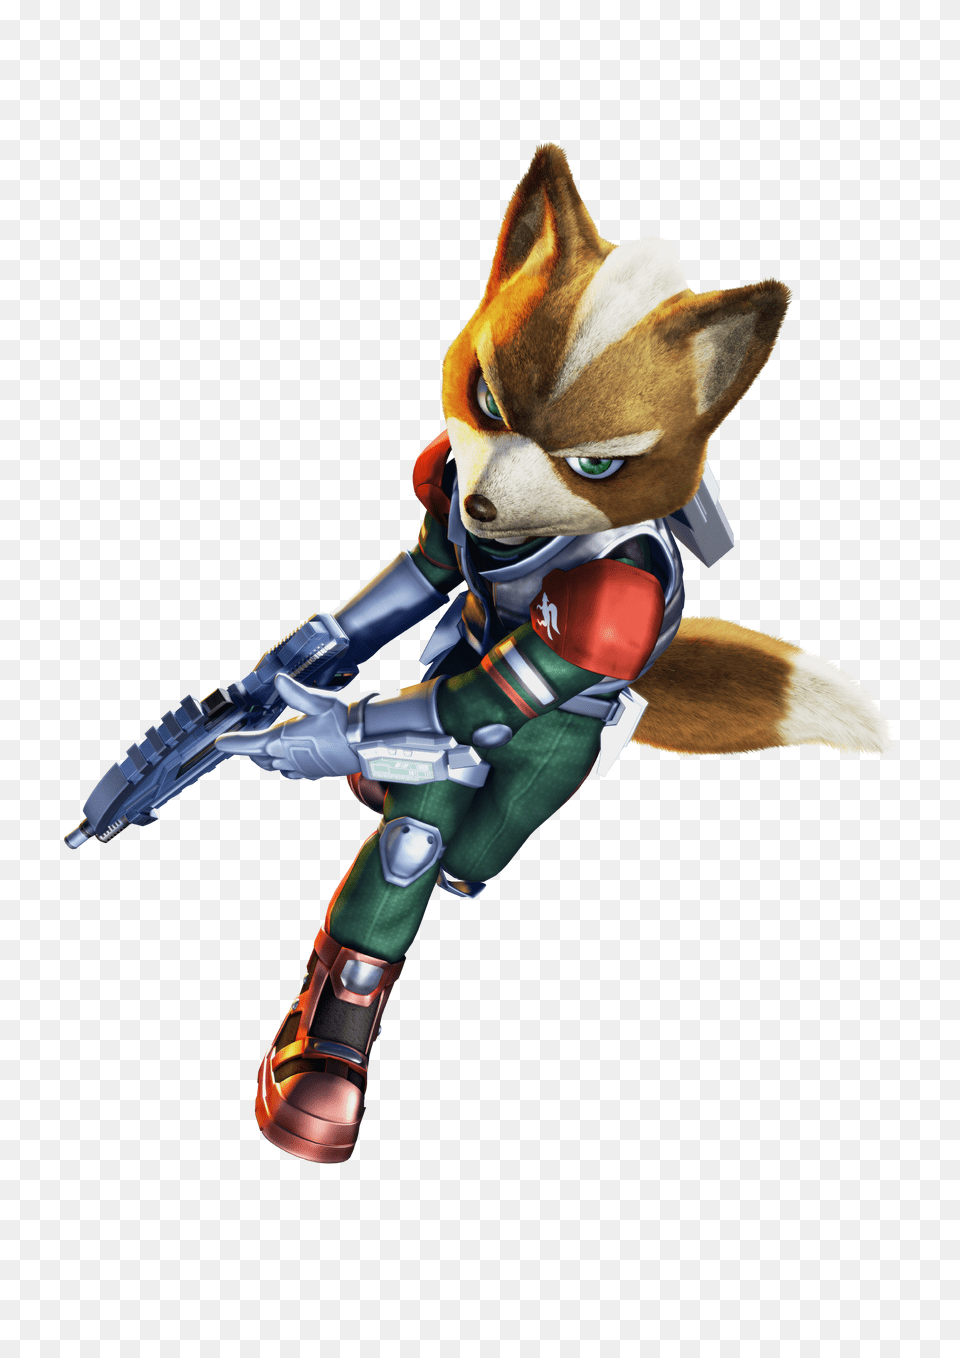 Star Fox Assault, Figurine, Toy, Clothing, Glove Png